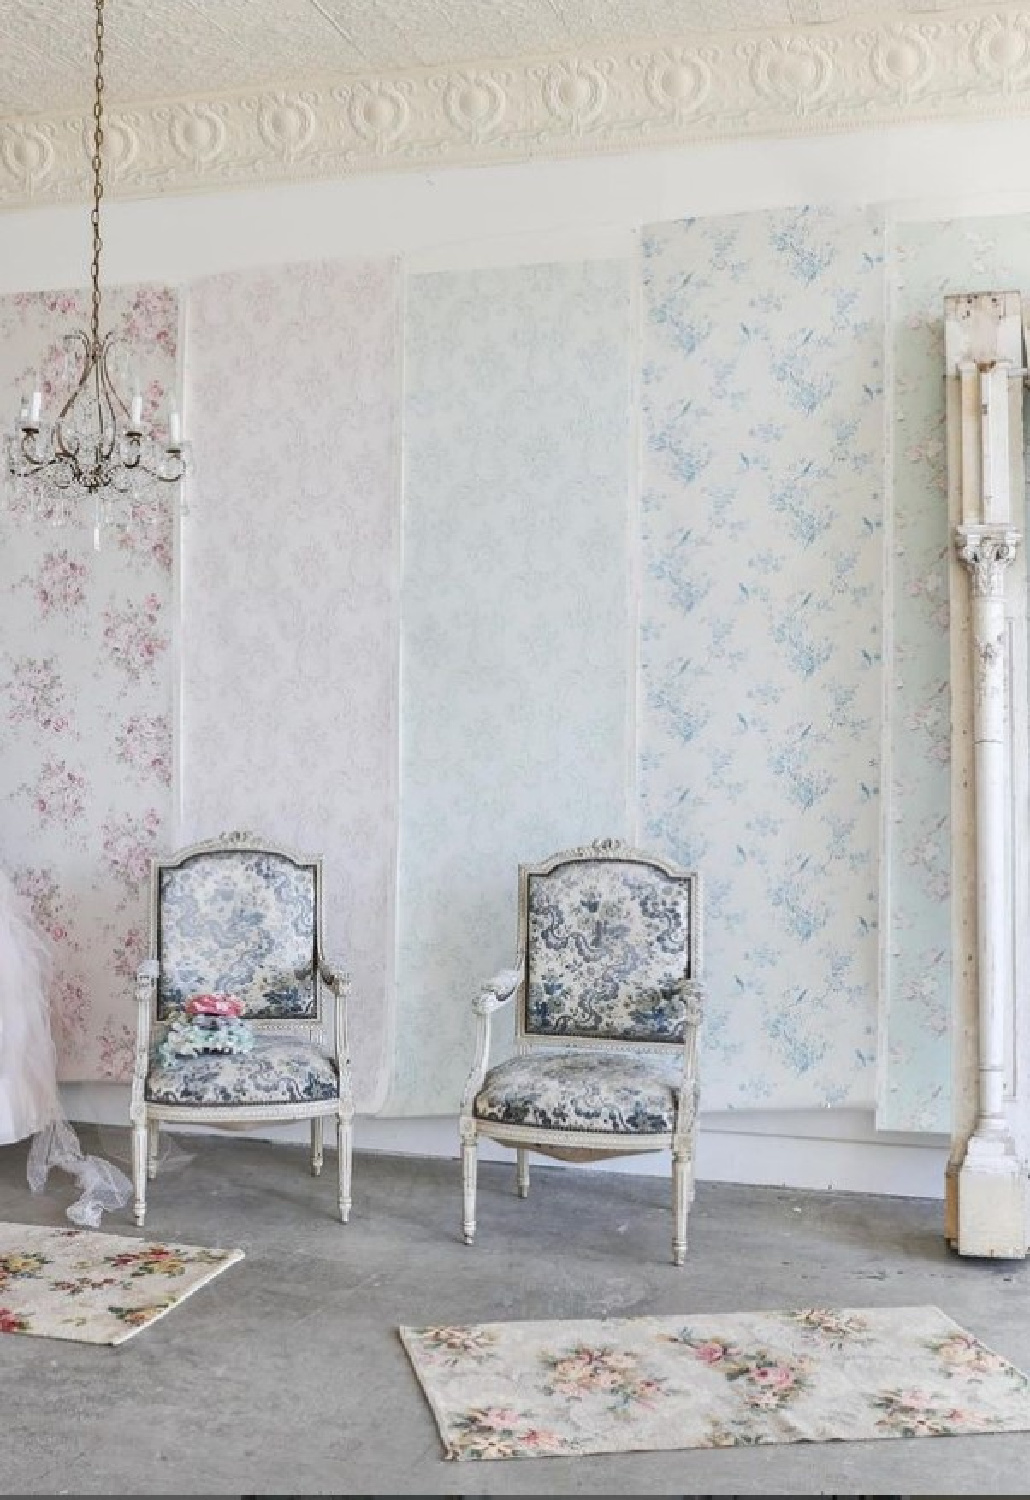 Shabby Chic floral wallpaper options at Rachel Ashwell Shabby Chic.